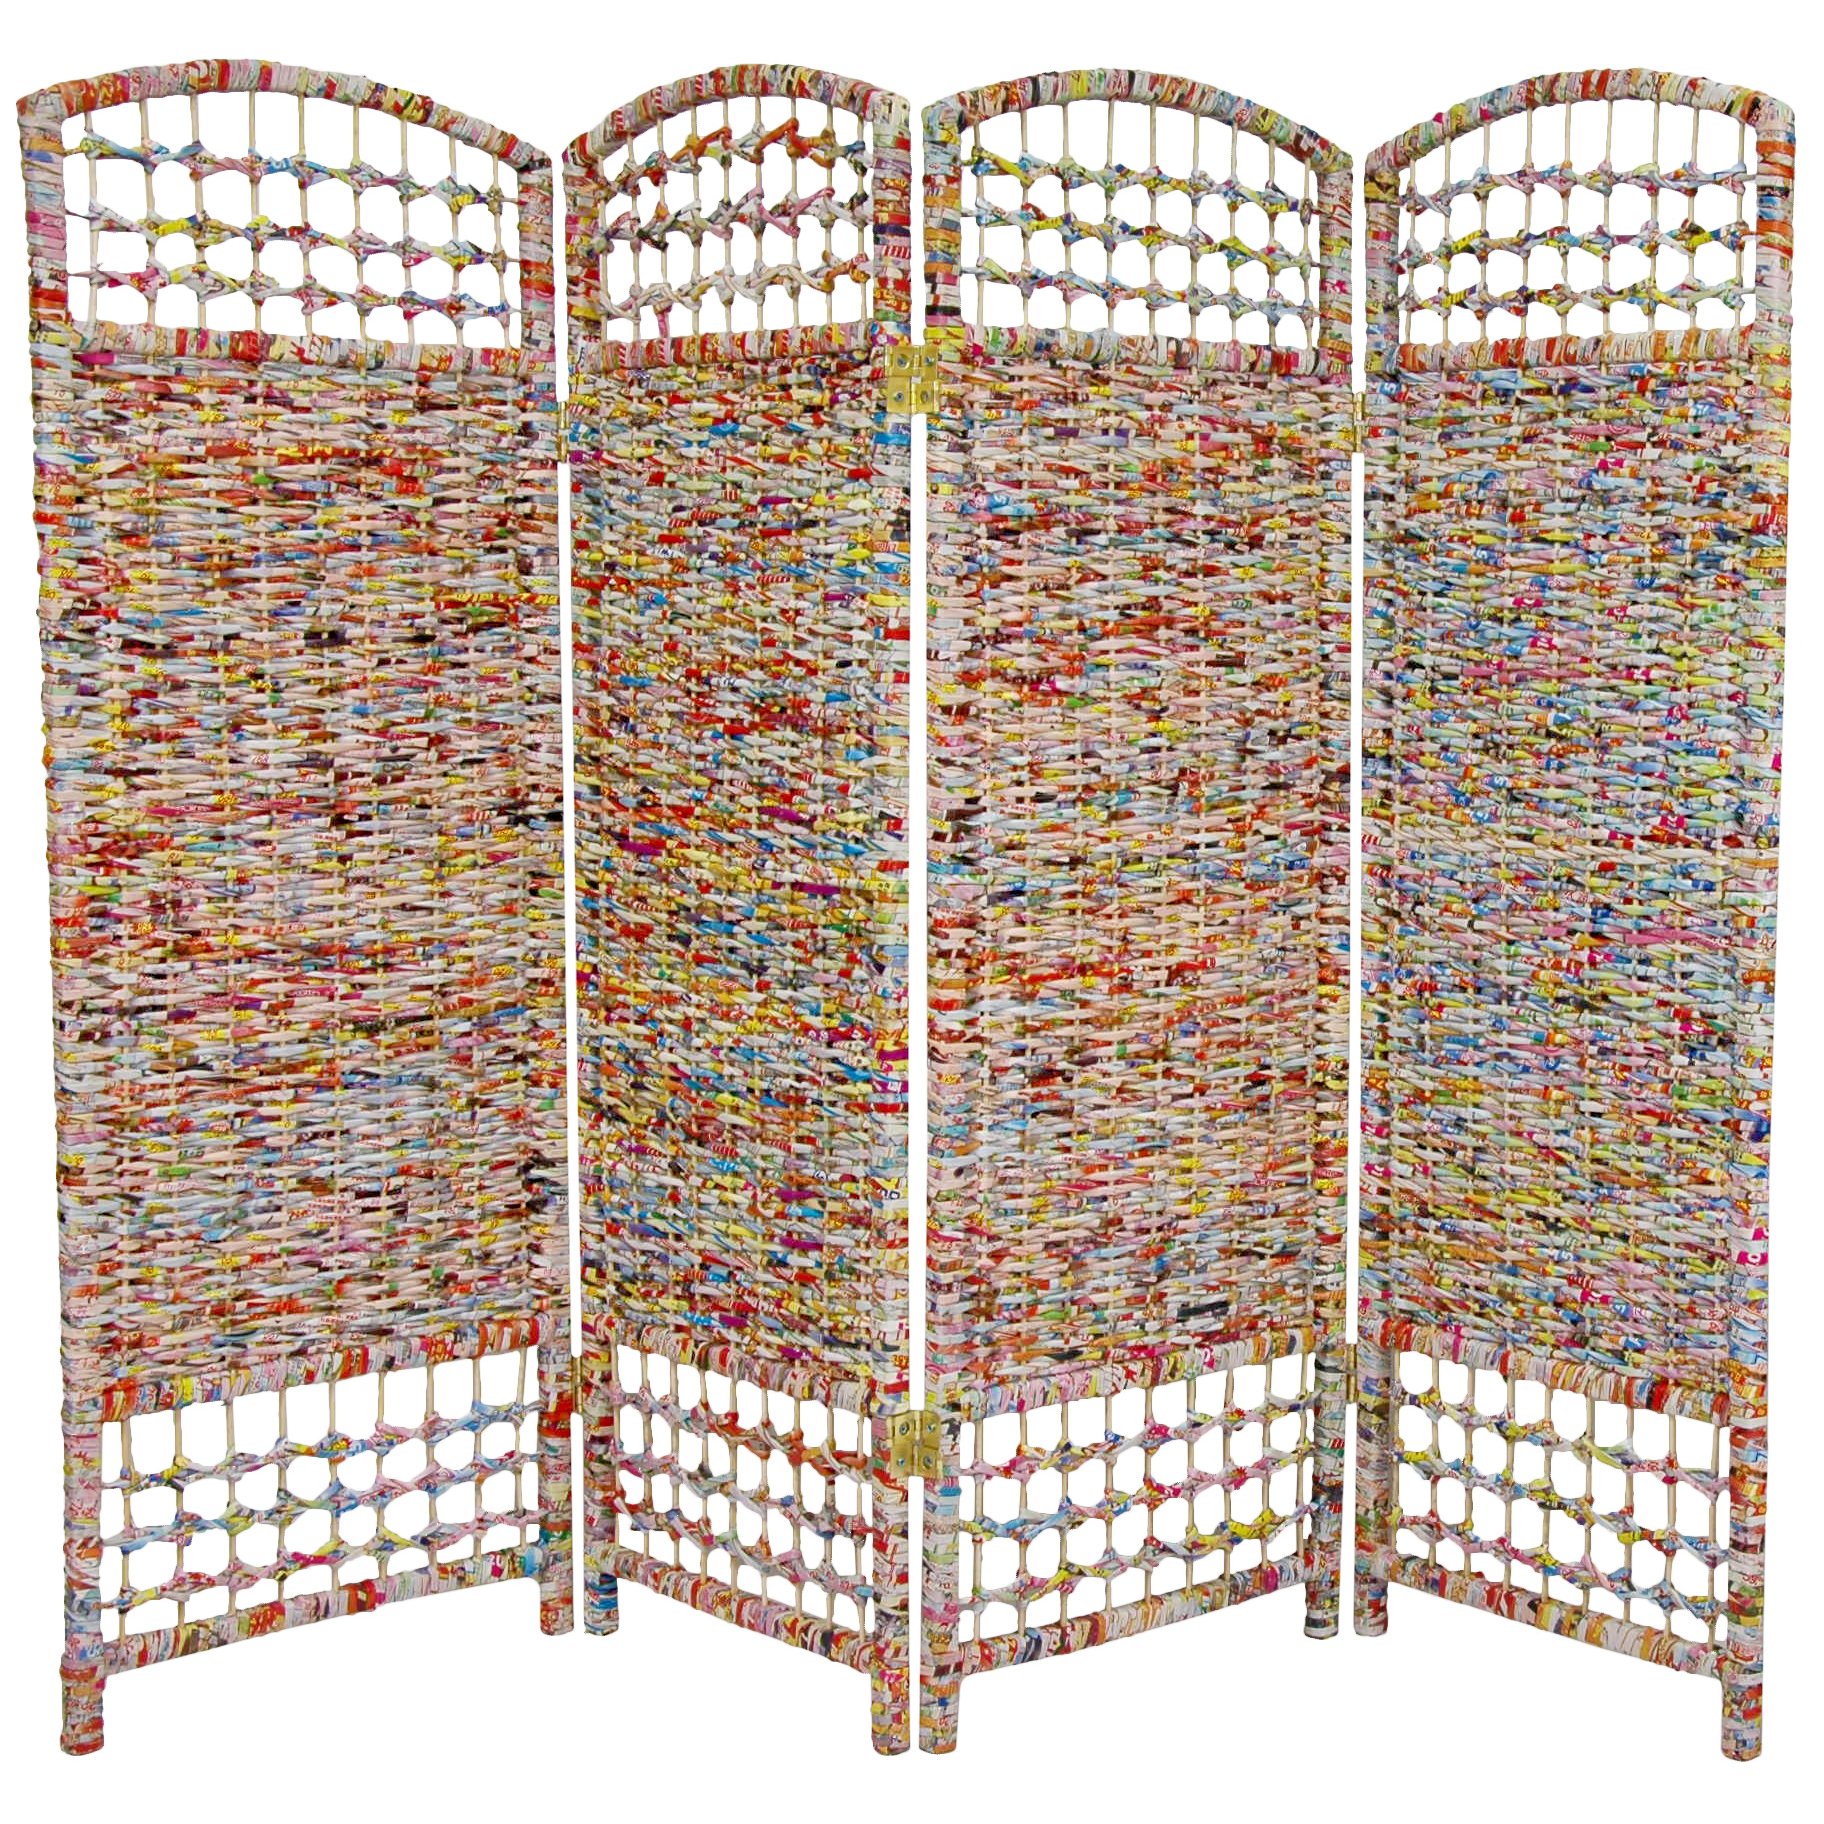 Oriental Furniture 4 ft Tall Recycled Magazine Room Divider - 4 Panel